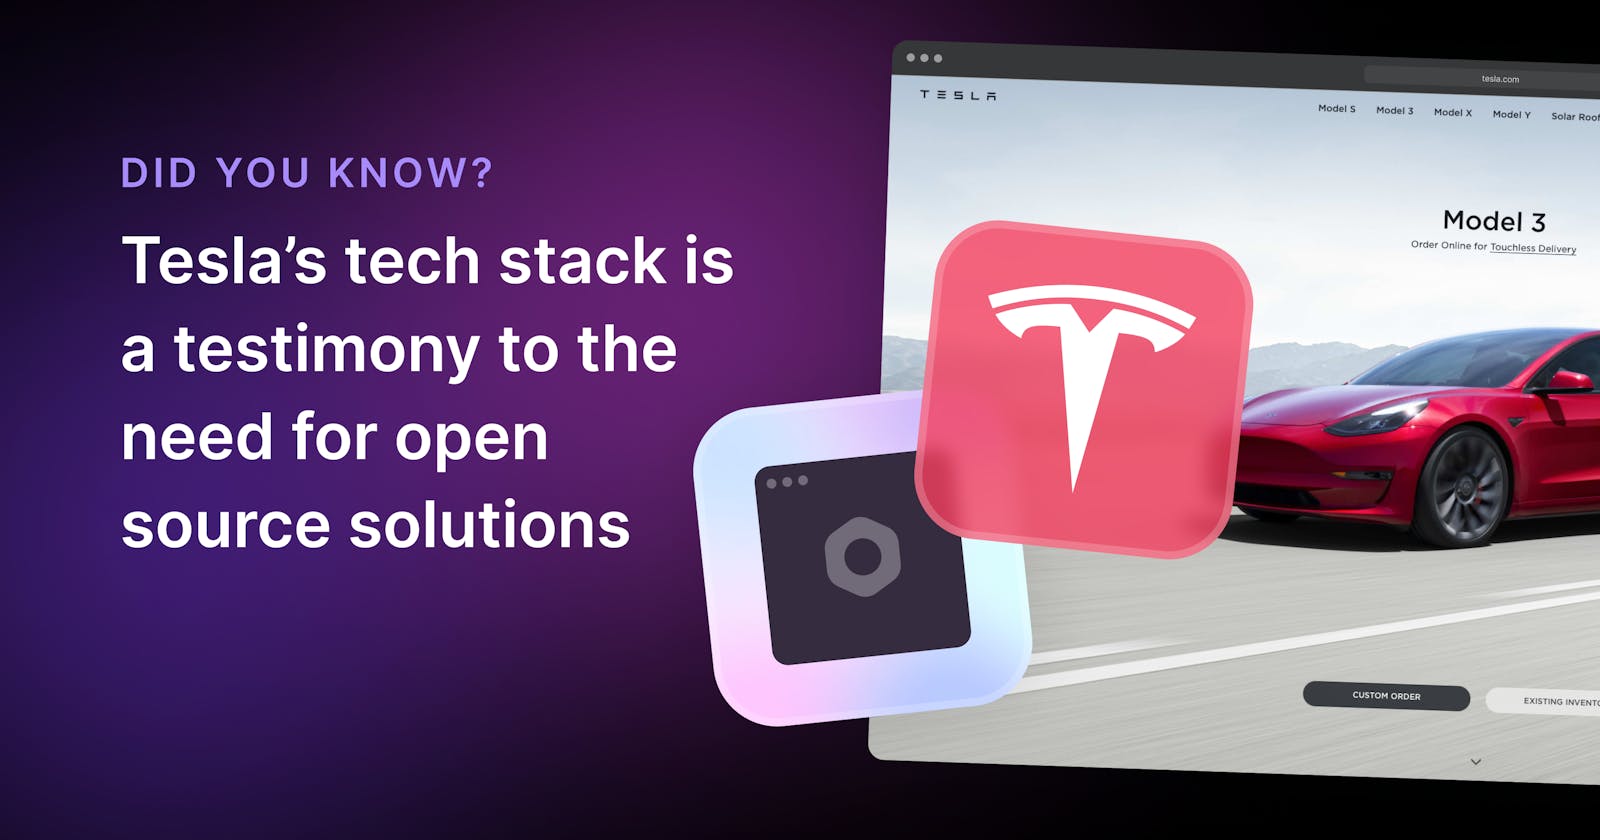 How Tesla’s tech stack is a testimony to the need for open source solutions